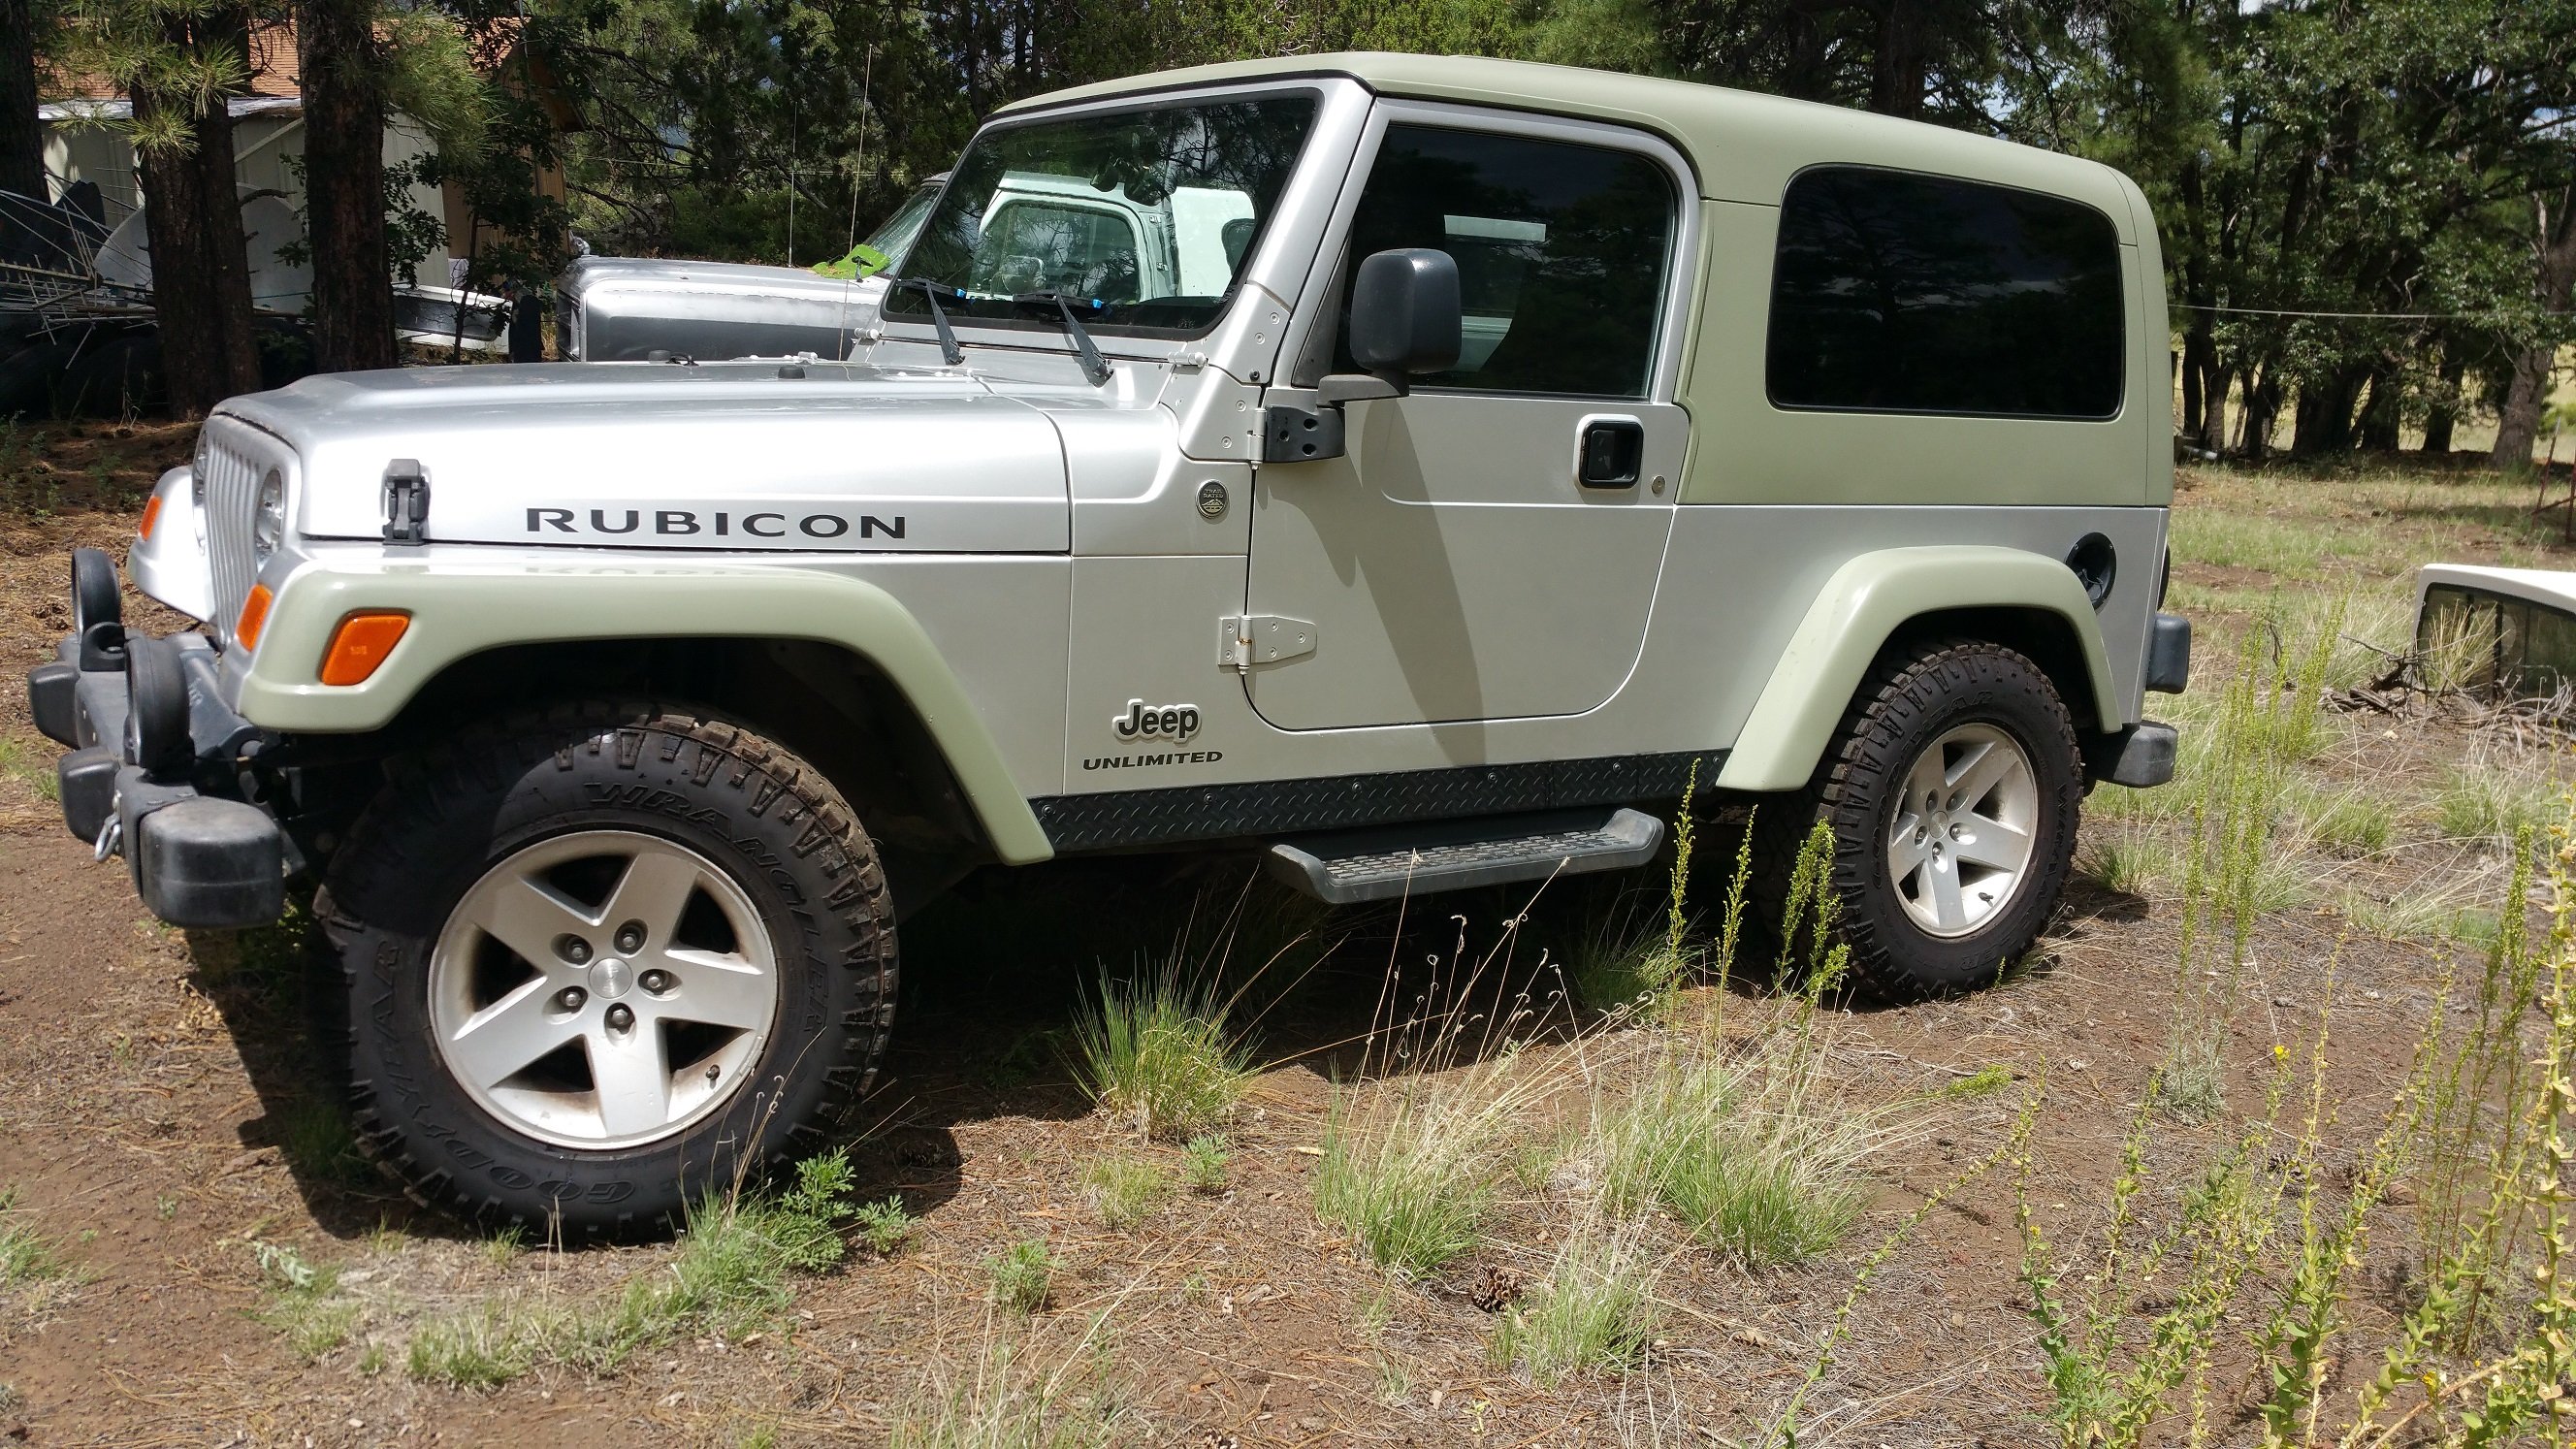 2005 Jeep Wrangler Rubicon LJ Unlimited - $18000 - Classified Ads -   Discussion forum